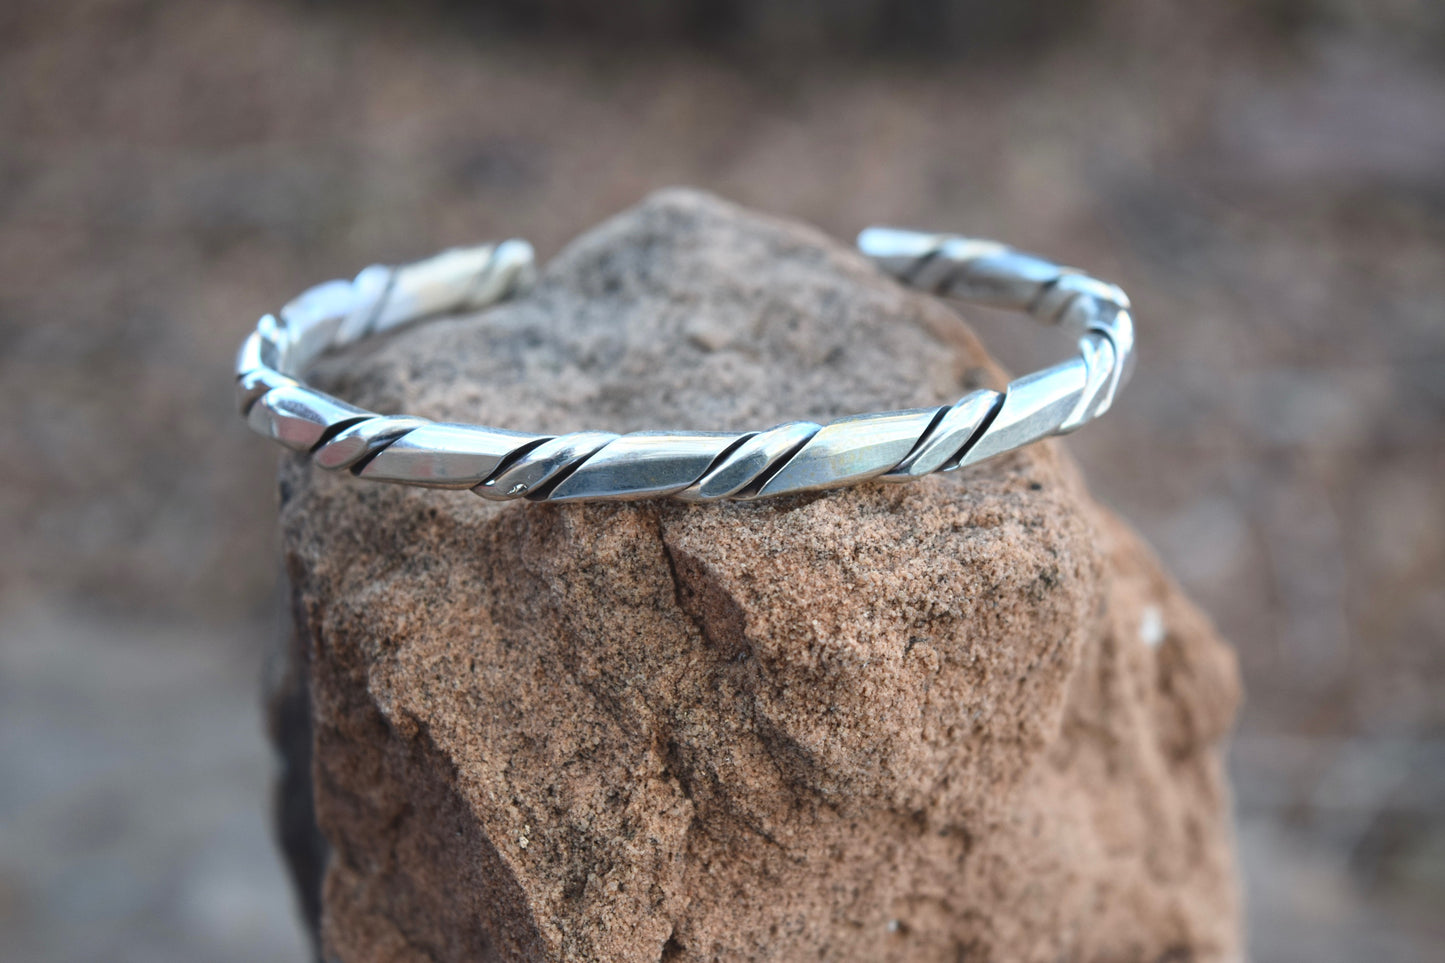 TWISTED SILVER BRACELET FROM THE RODGERS COLLECTION